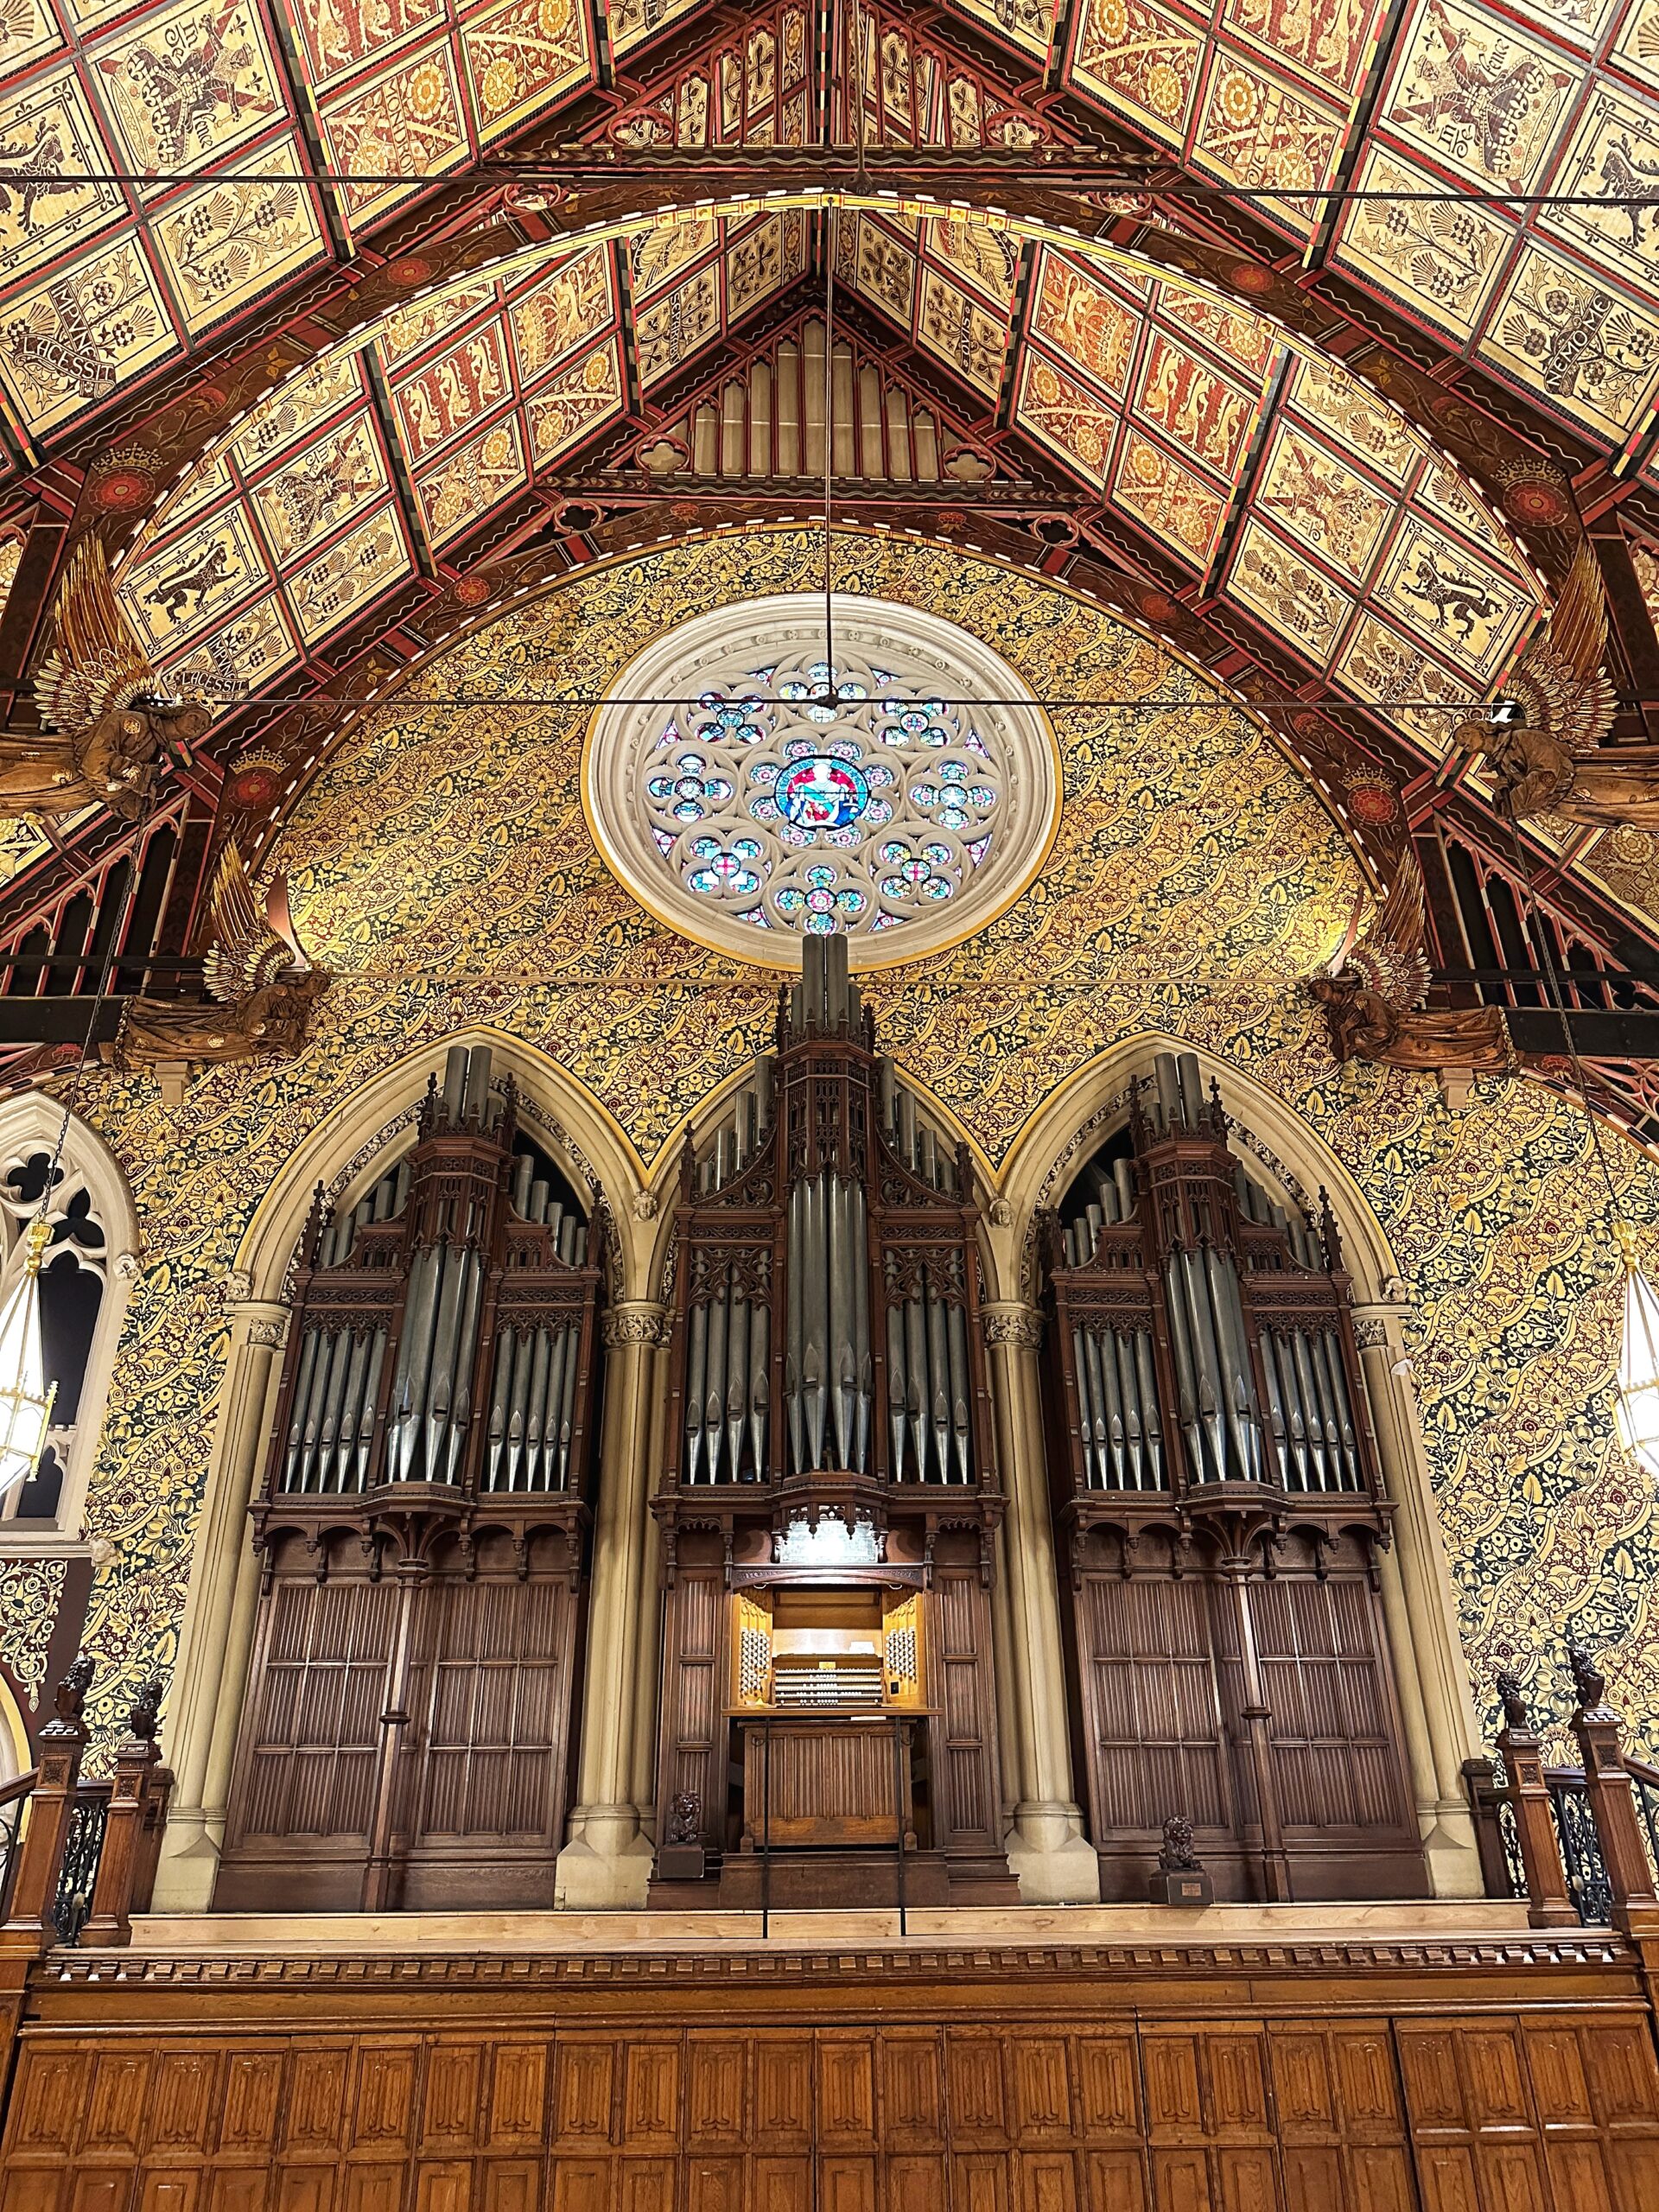 The huge organ in Great Hall